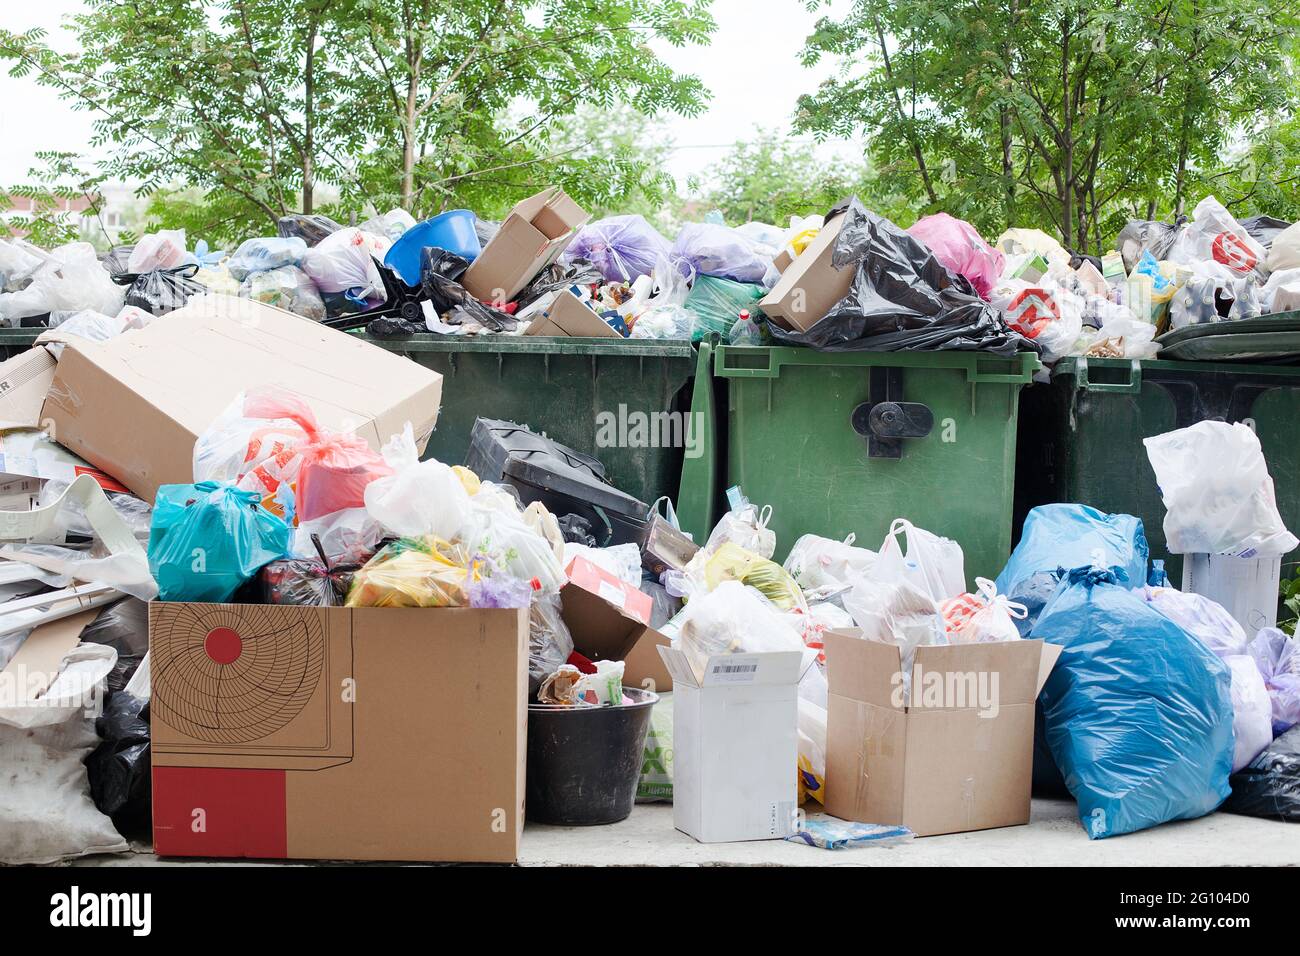 https://c8.alamy.com/comp/2G104D0/overloaded-dumpster-full-garbage-container-household-garbage-bin-trash-can-heap-of-unsorted-rubbish-plastic-bags-pile-of-refuse-litter-waste-2G104D0.jpg